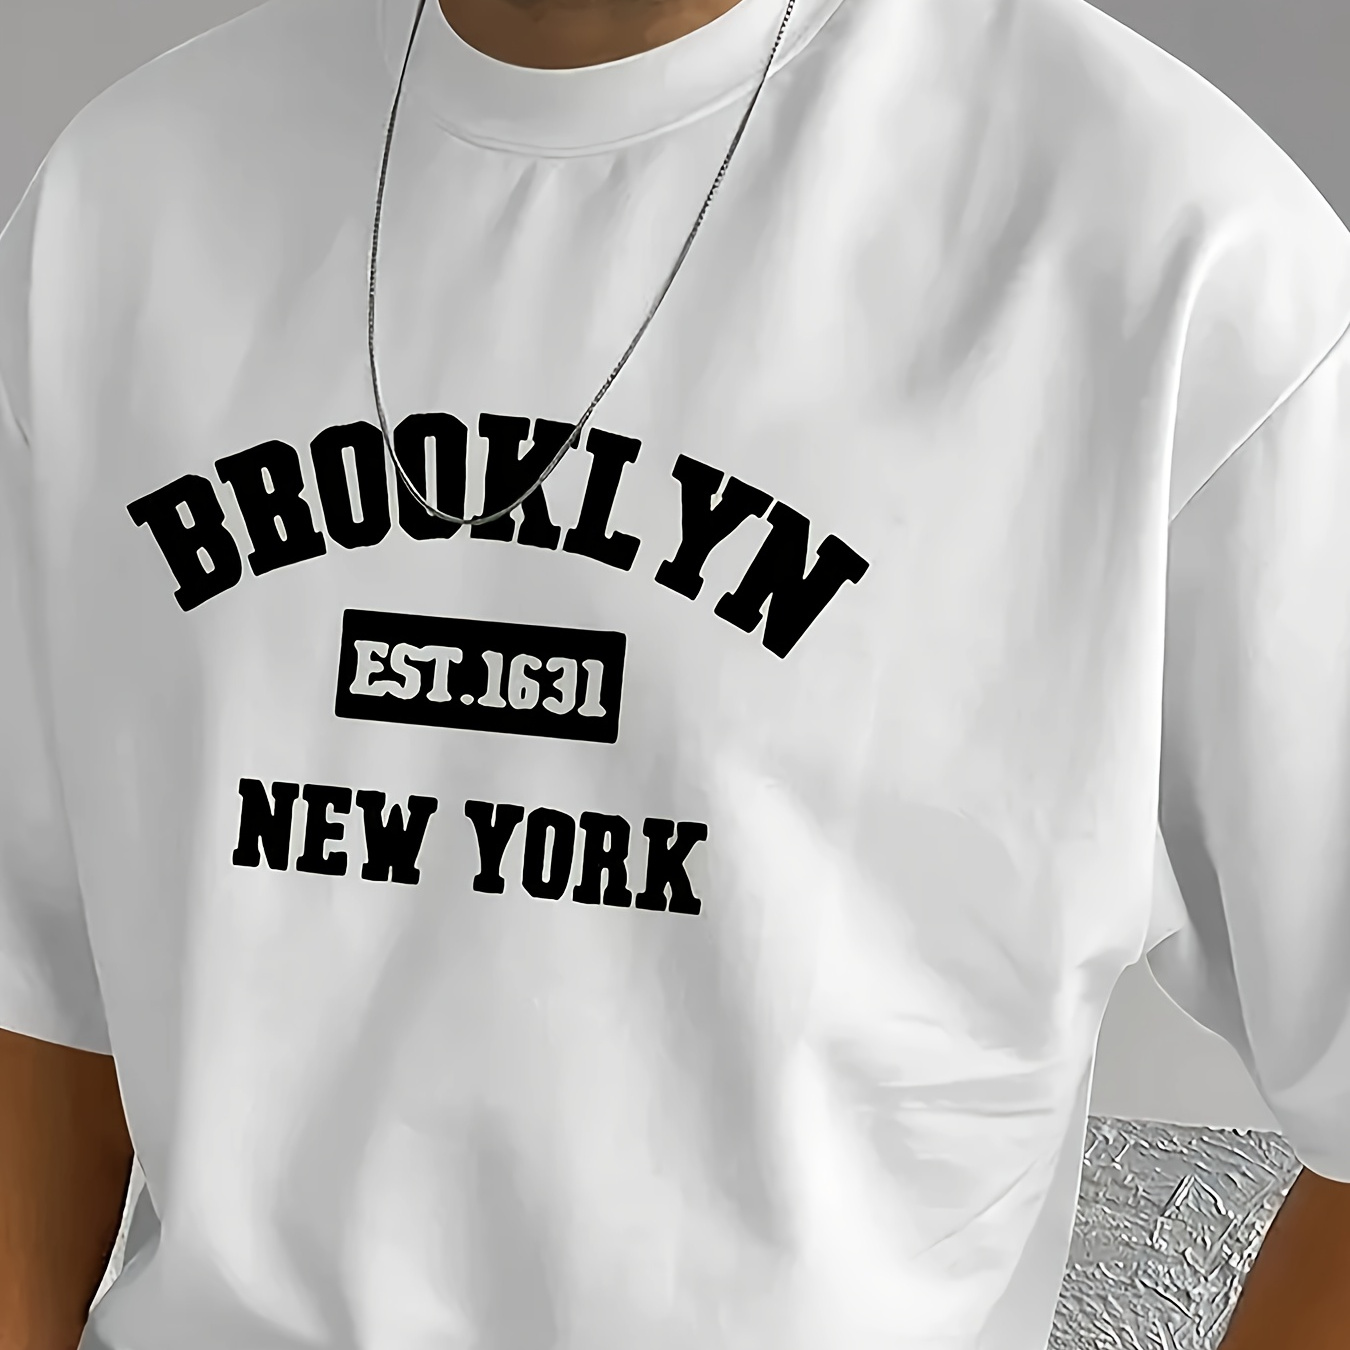 

Brooklyn Alphabet Print Men's Crew Neck Short Sleeve Cotton T-shirt, Casual Summer T-shirt For Daily Wear And Vacation Resorts